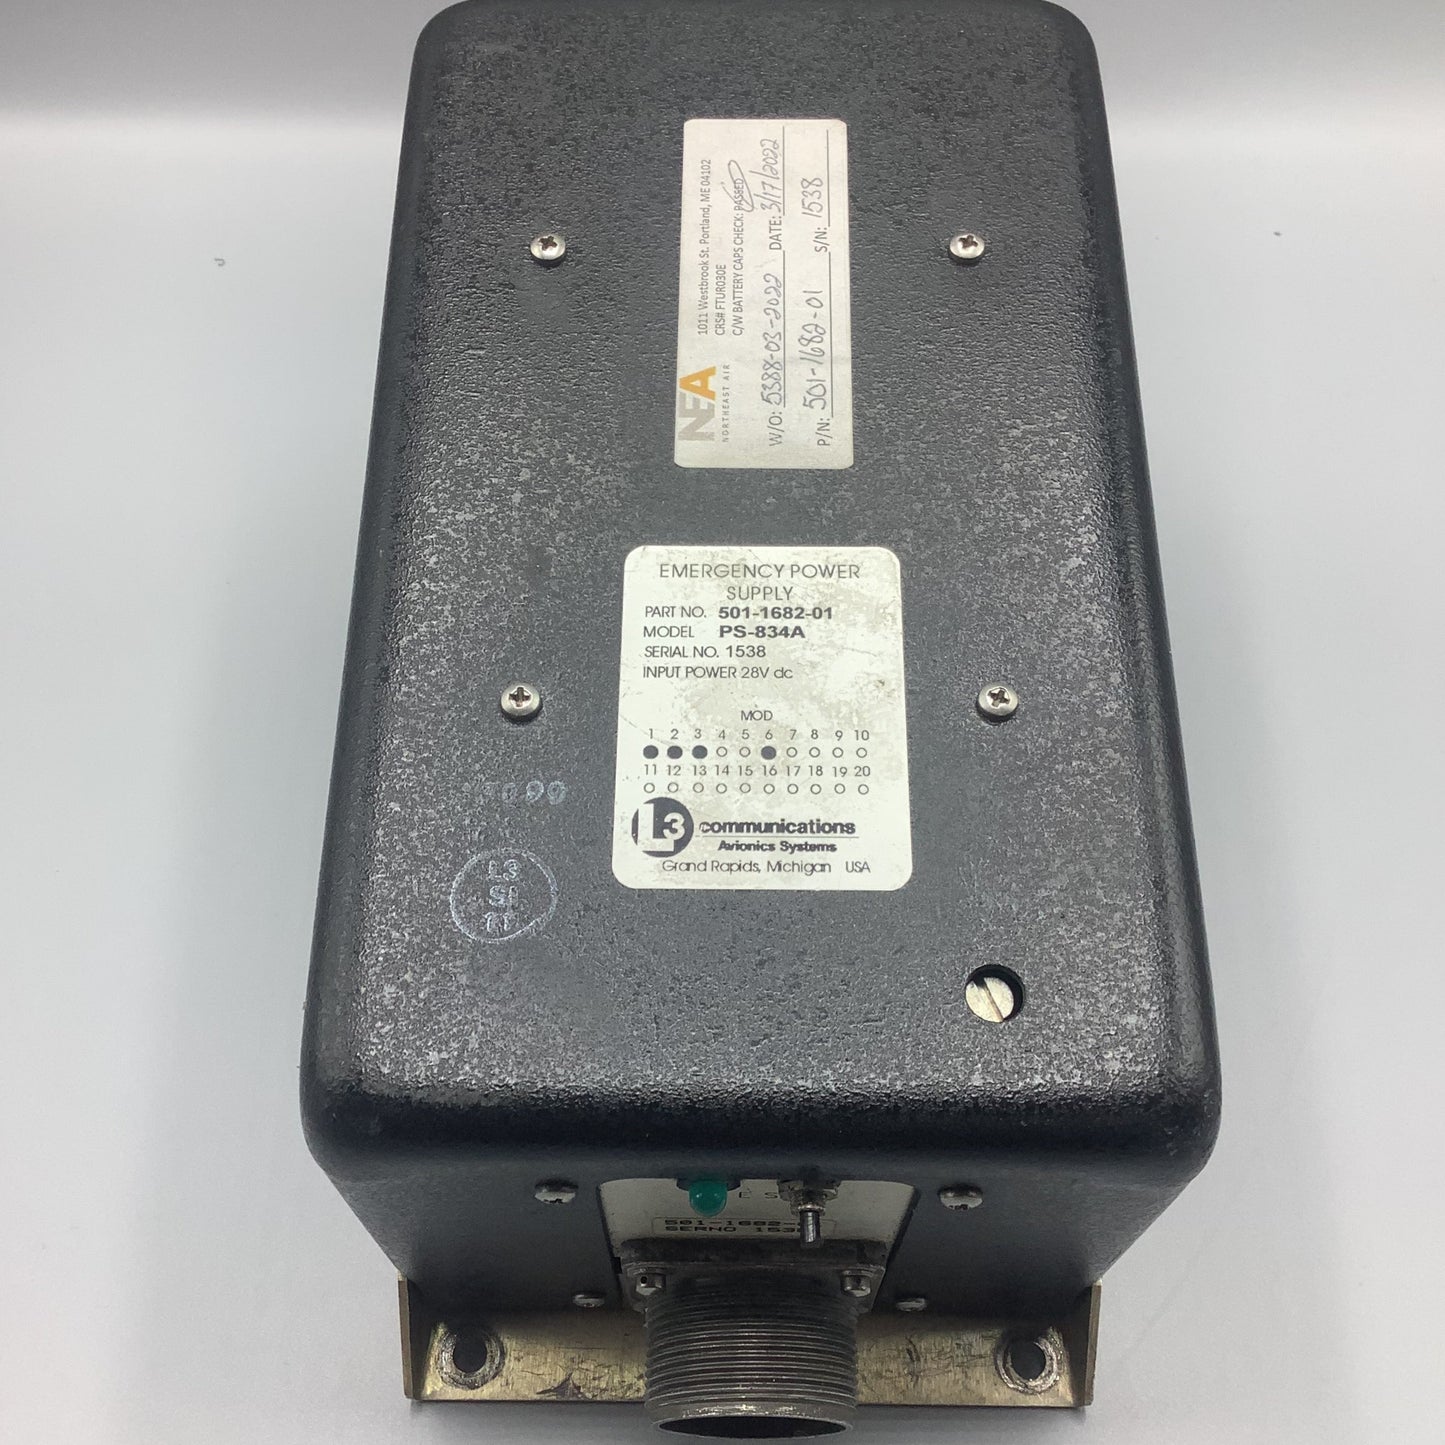 L3 PS-834A Emergency Power Supply - Part Number:501-1682-01